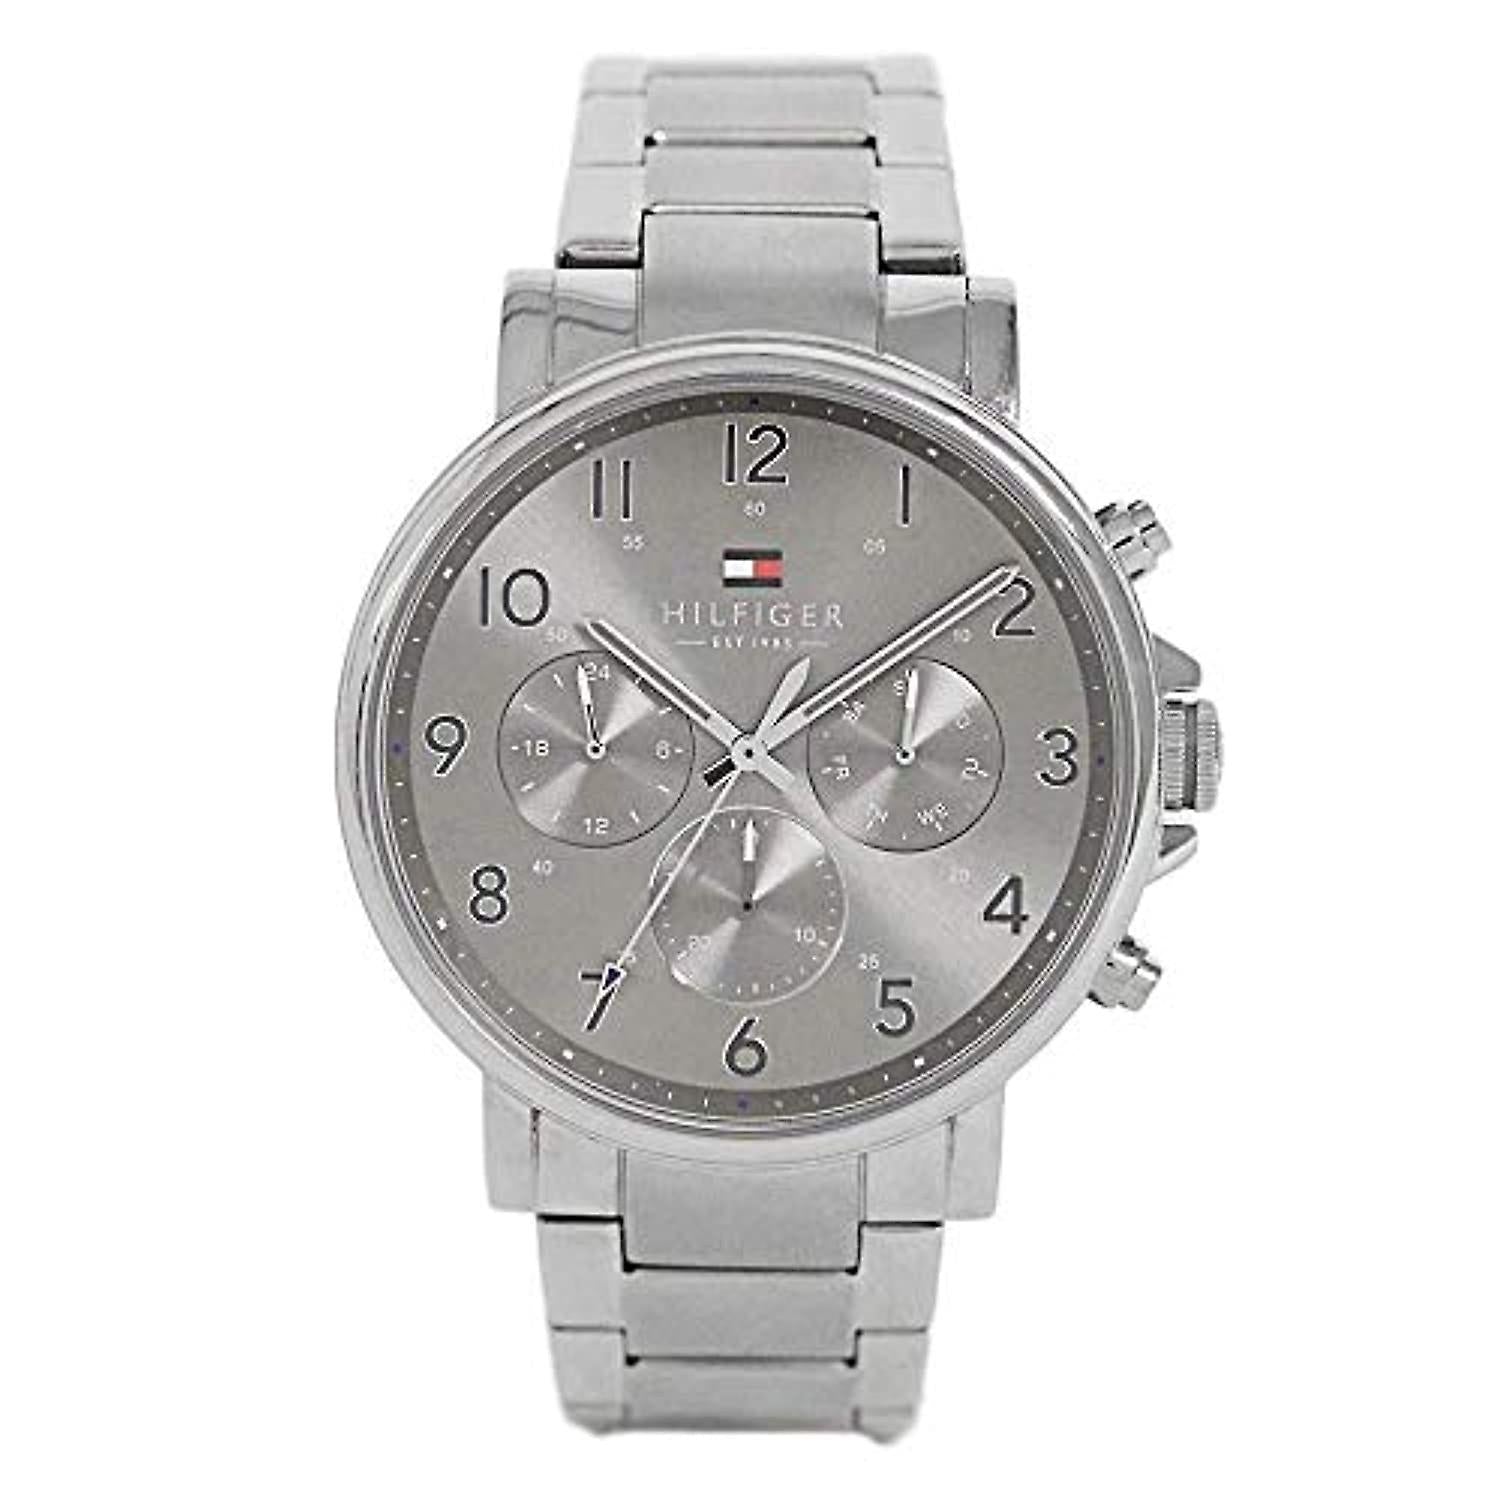 Buy Tommy Hilfiger Chronograph Quartz Stainless Steel Grey Dial 46mm Watch for Men - 1710382 in Pakistan